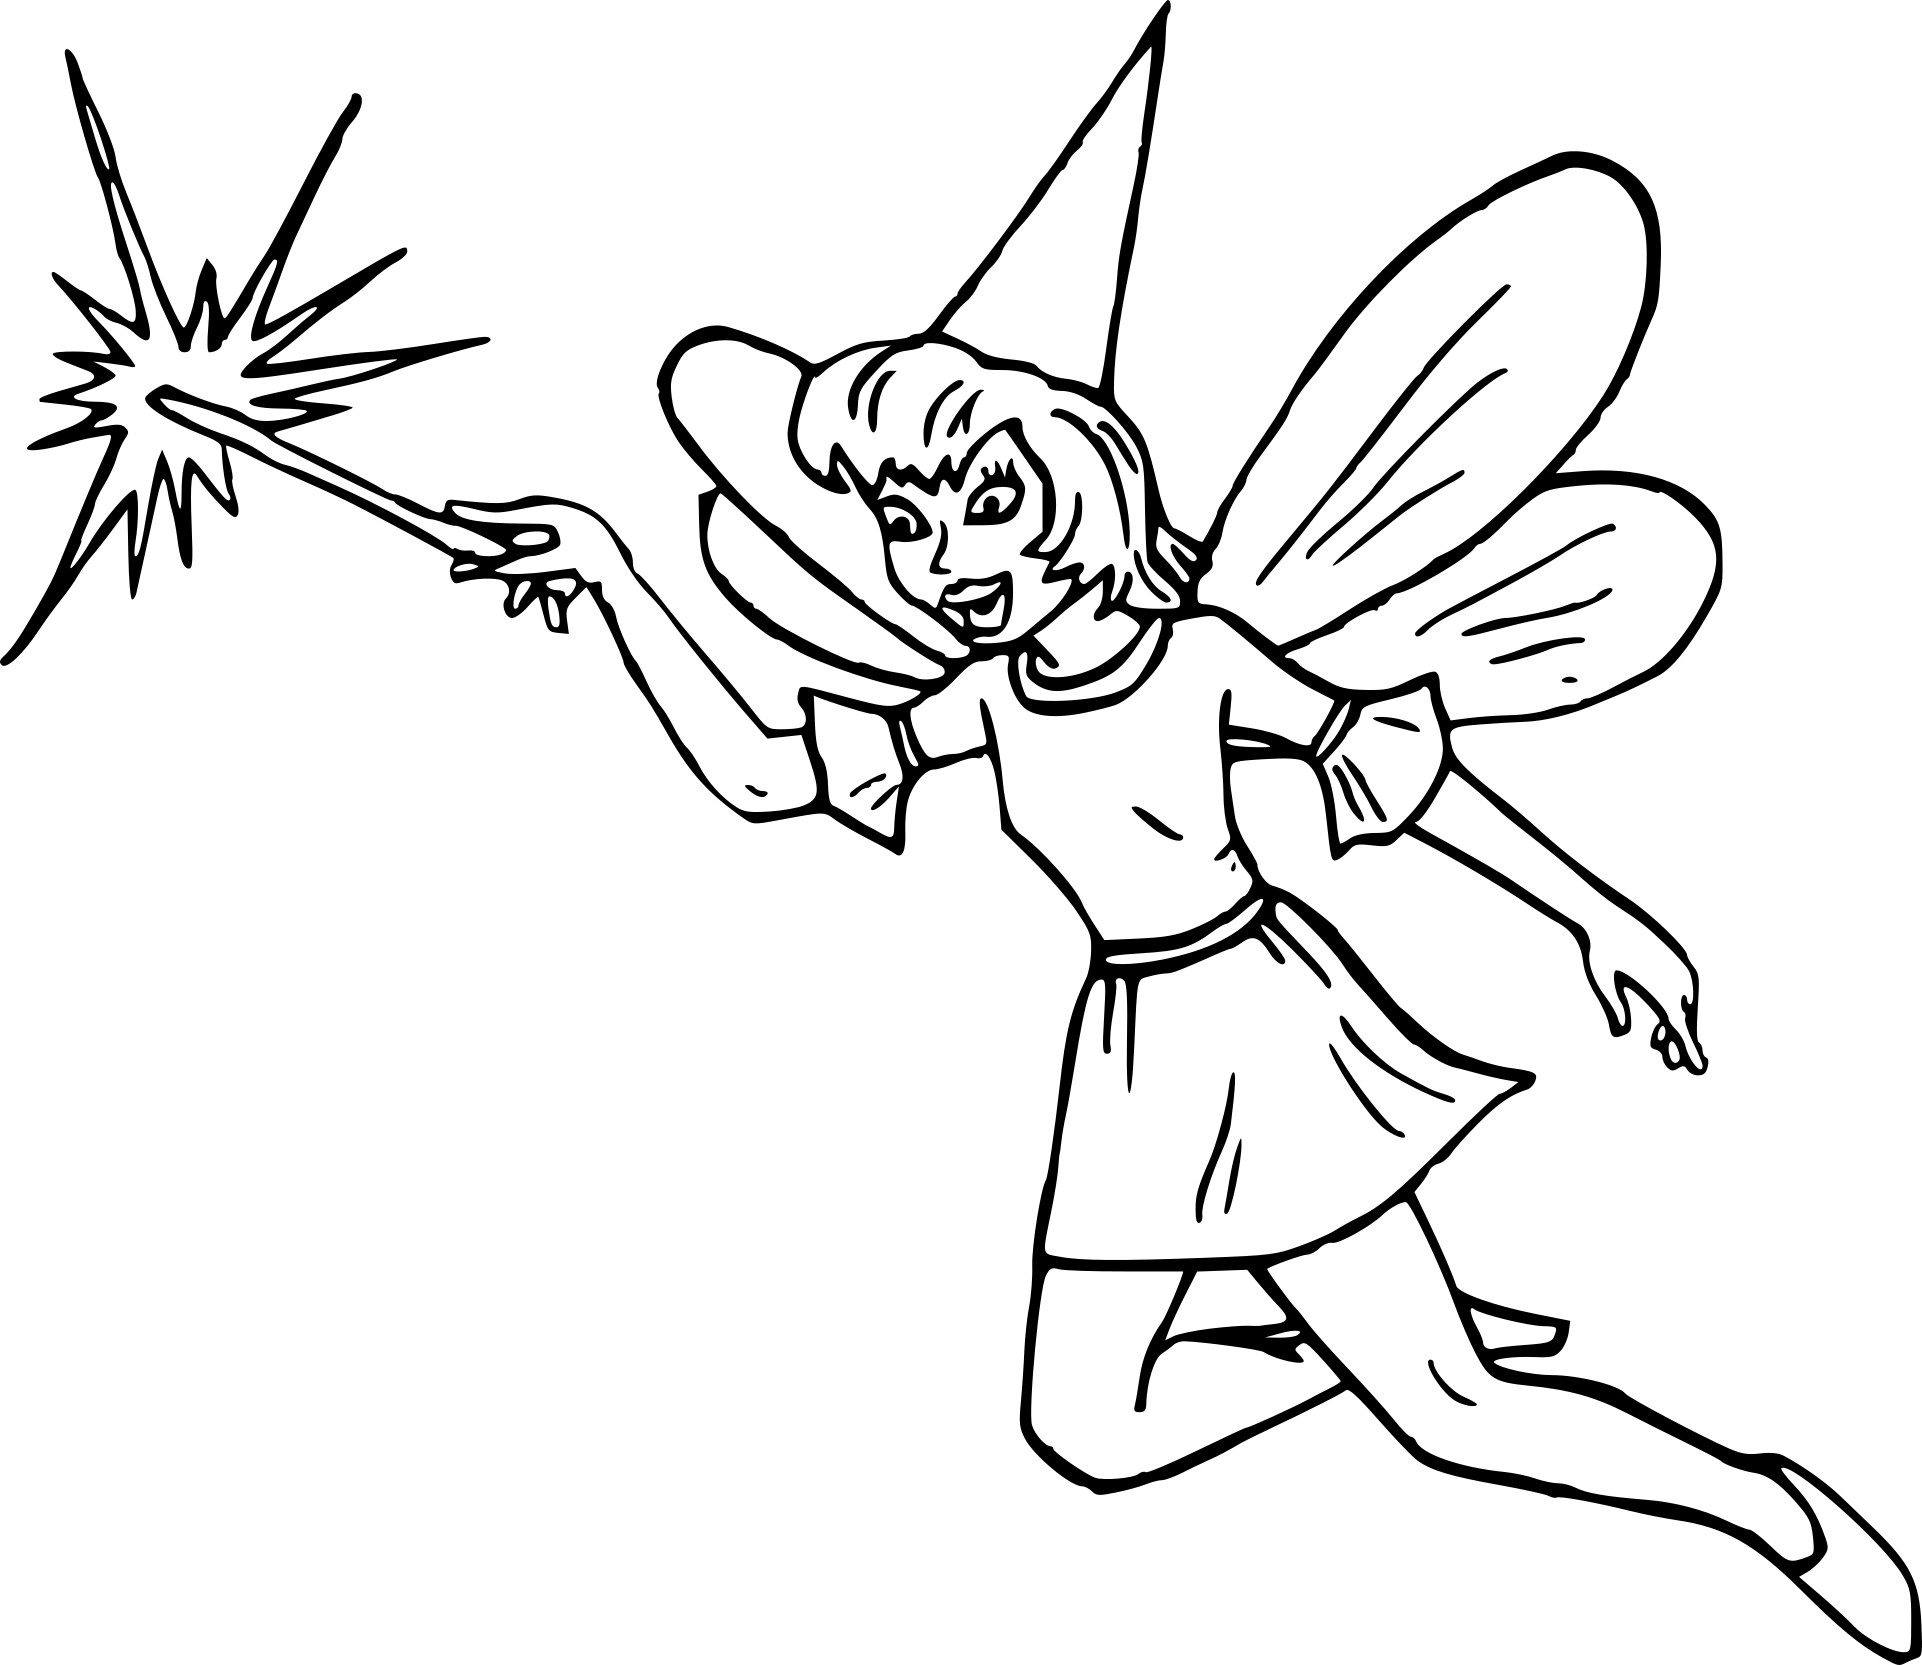 Elf And Fairy coloring page